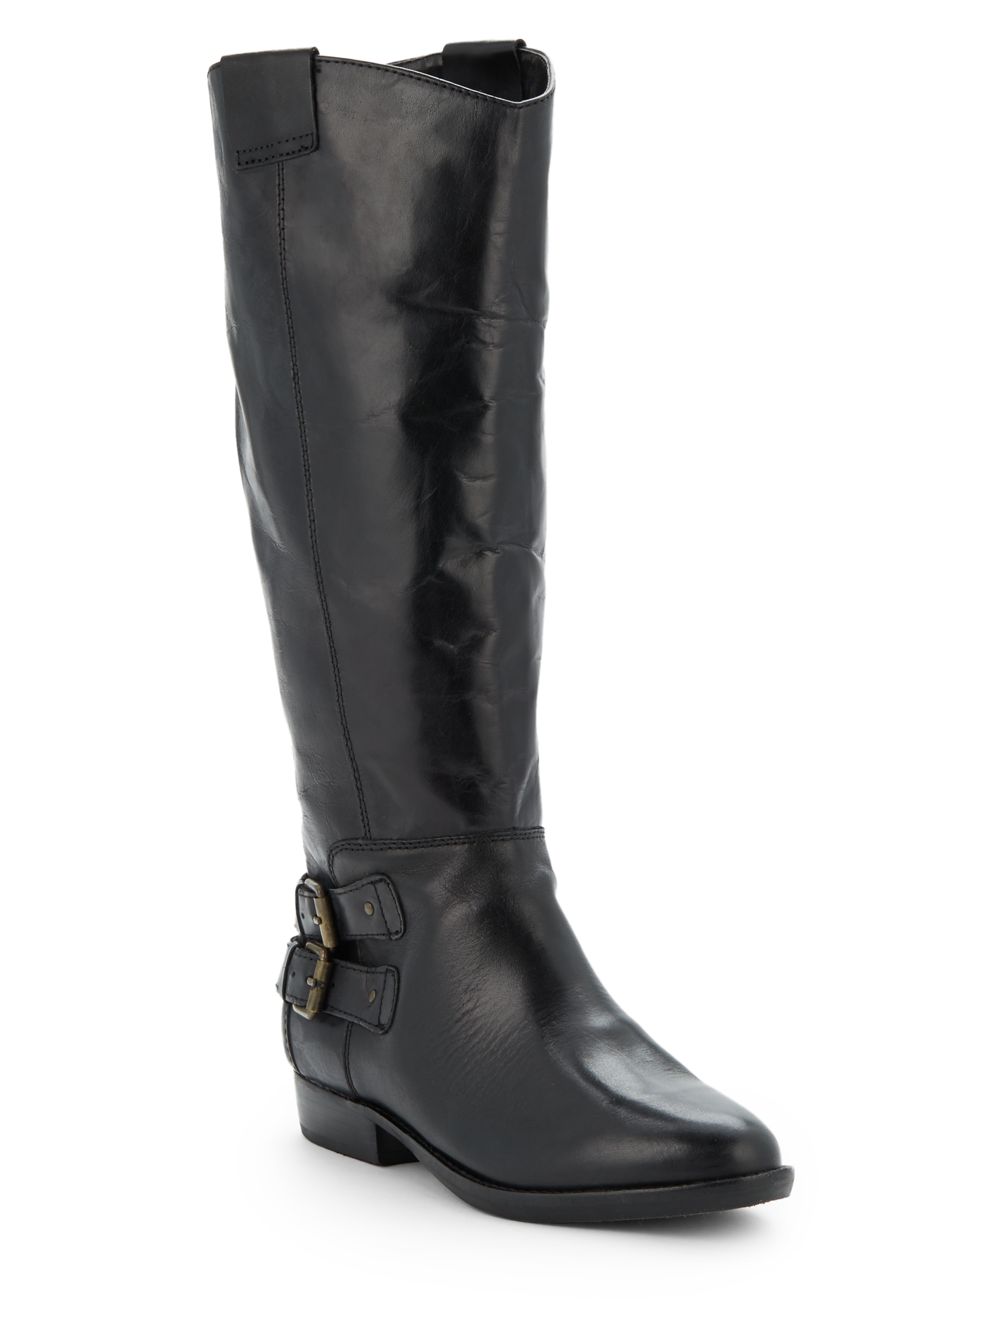 Dolce Vita Beatrix Leather Western Boots in Black | Lyst